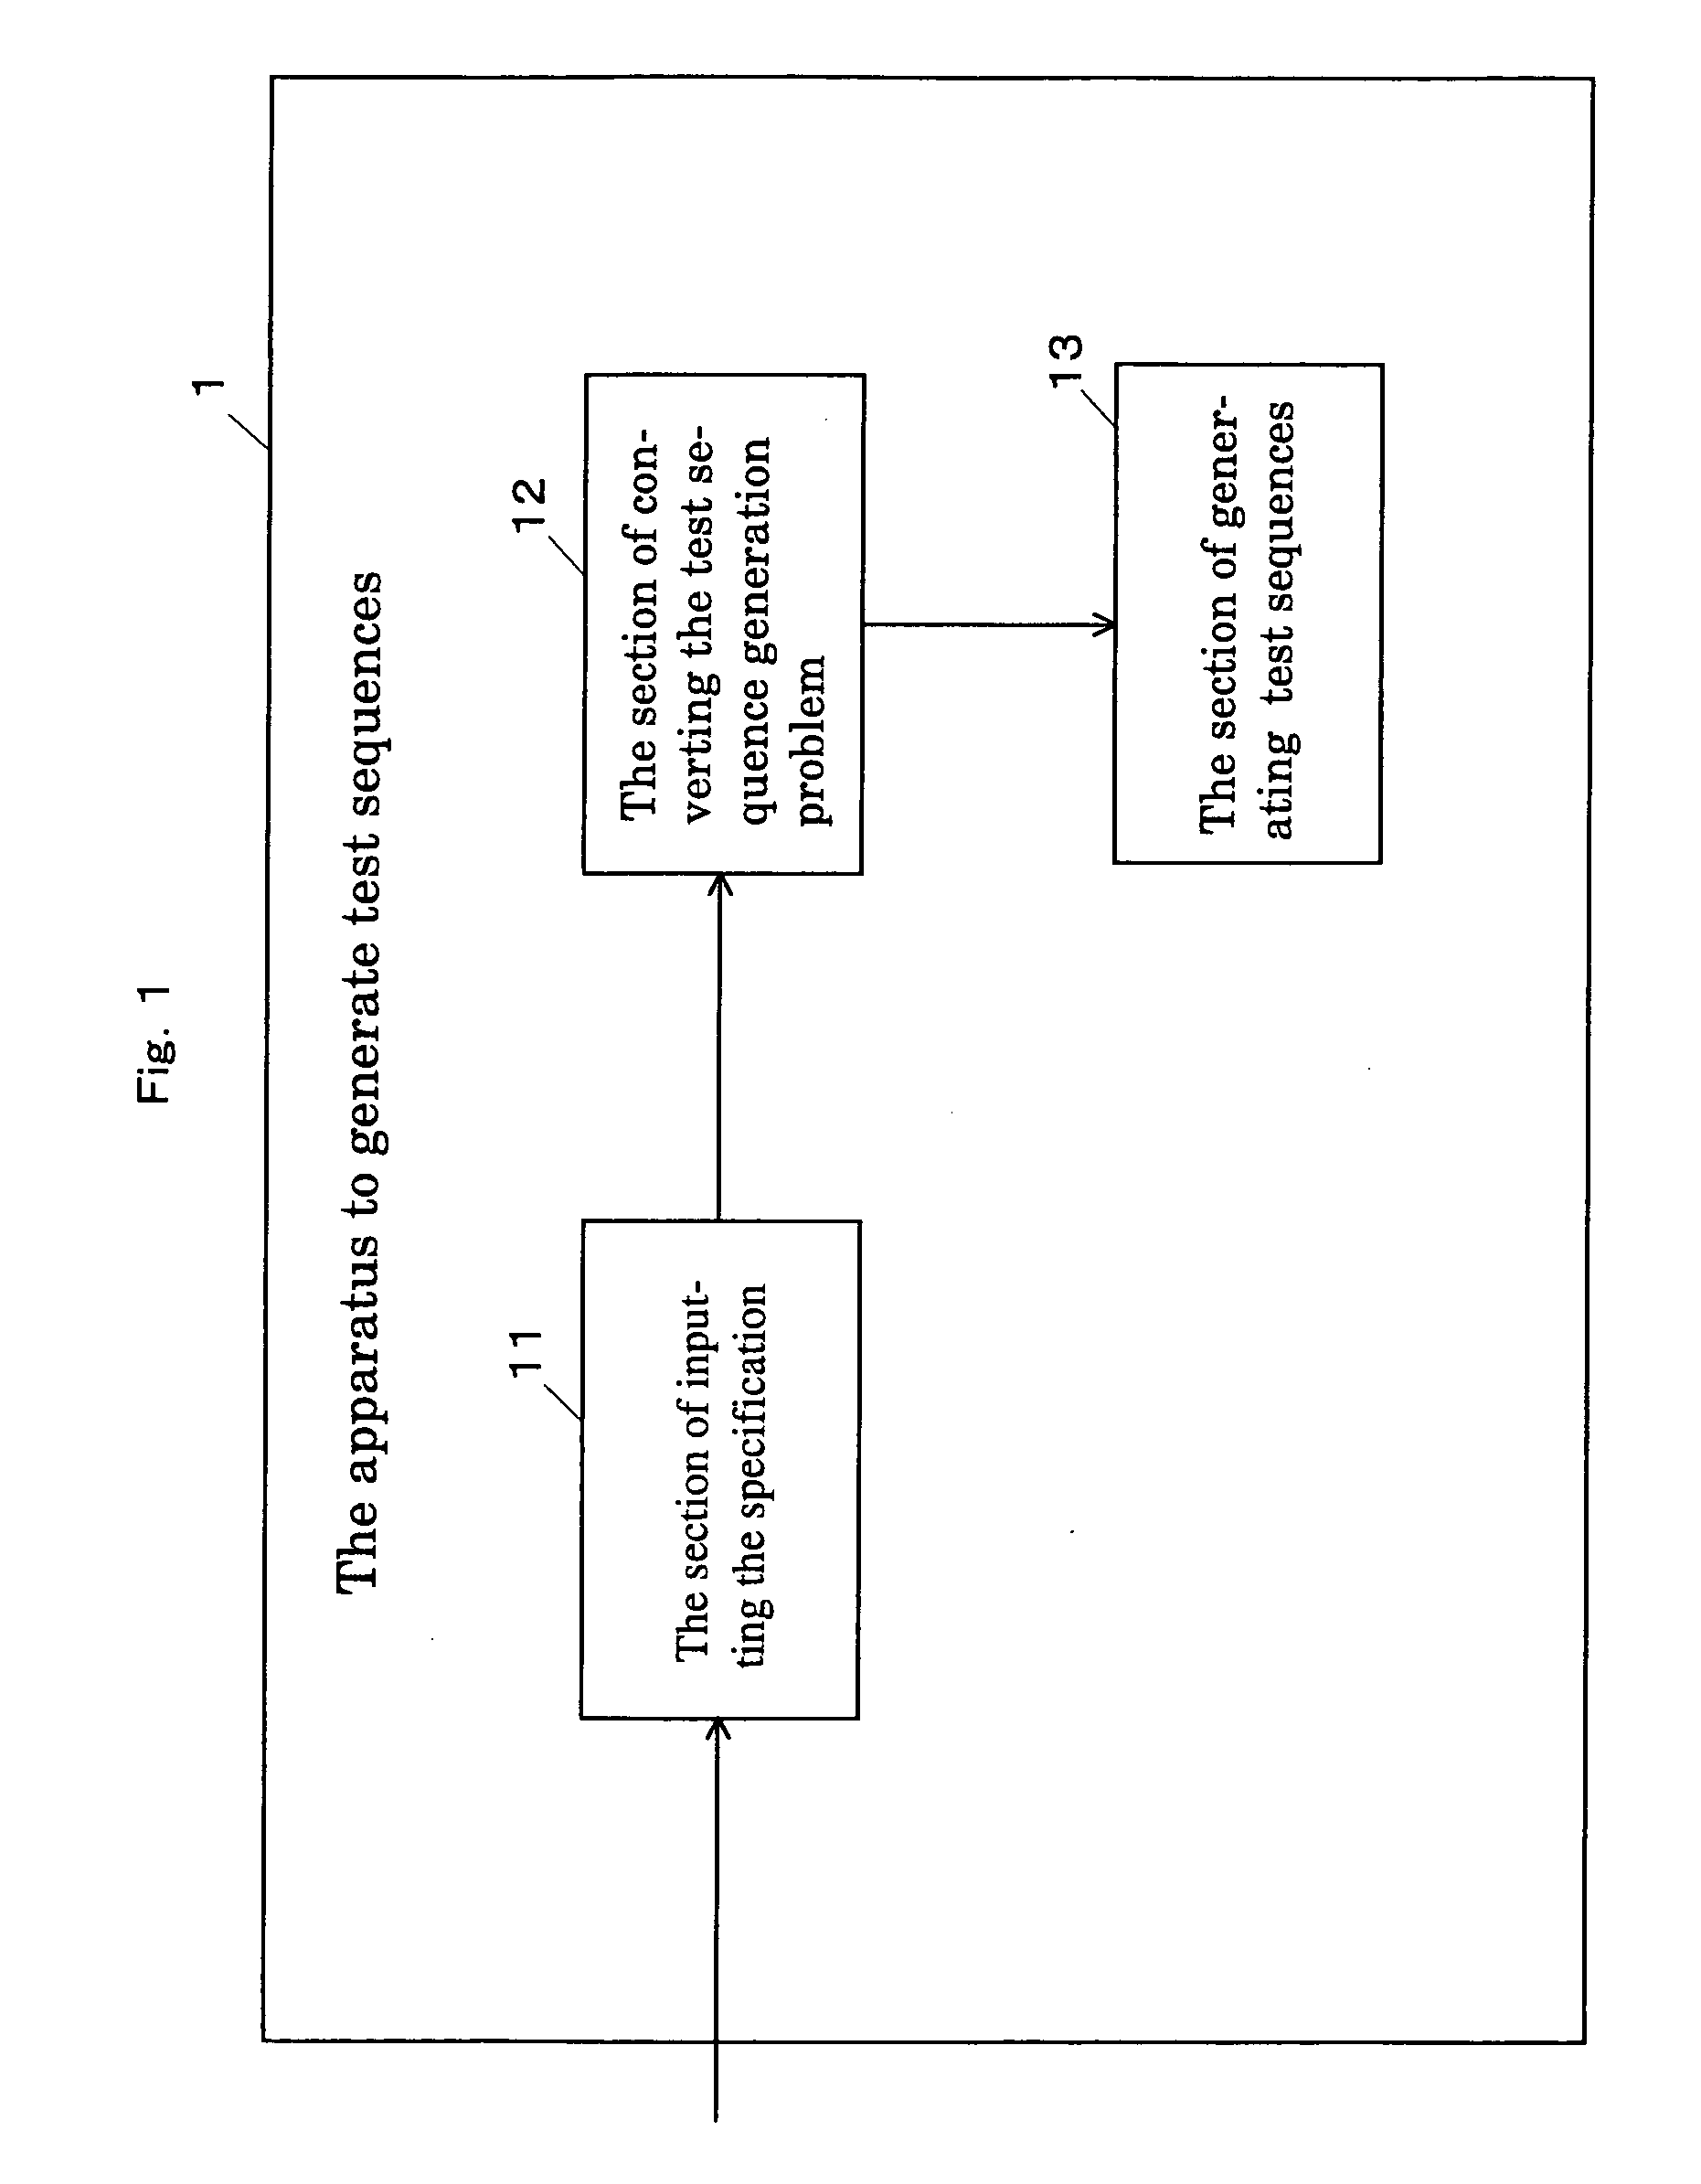 Method and apparatus to generate test sequences for communication protocols